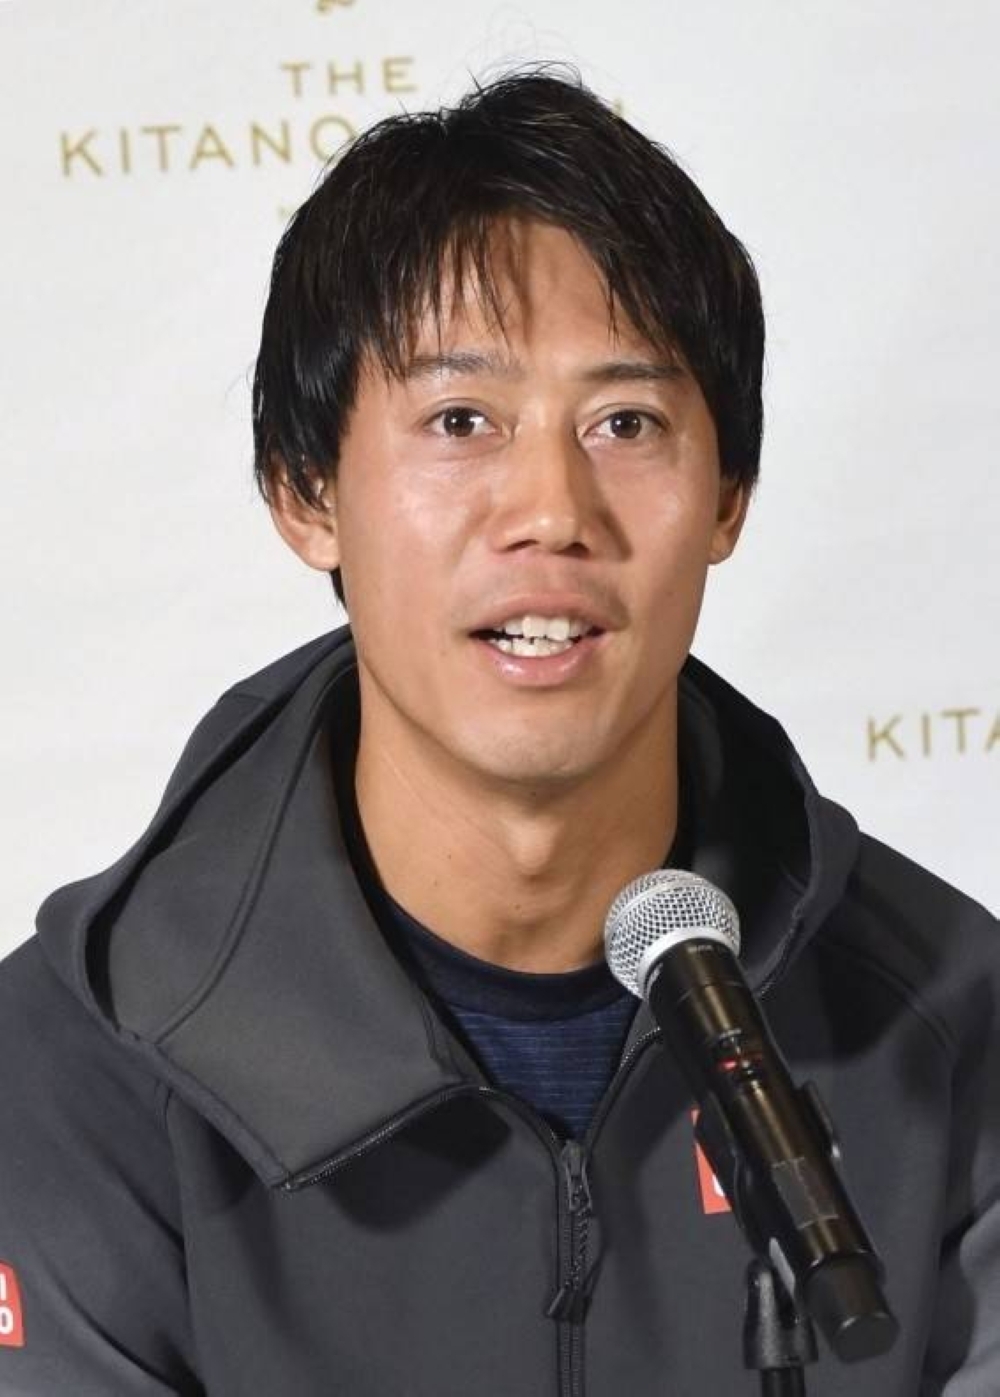 Kei Nishikori returned to competition in June after undergoing hip surgery in January 2022.